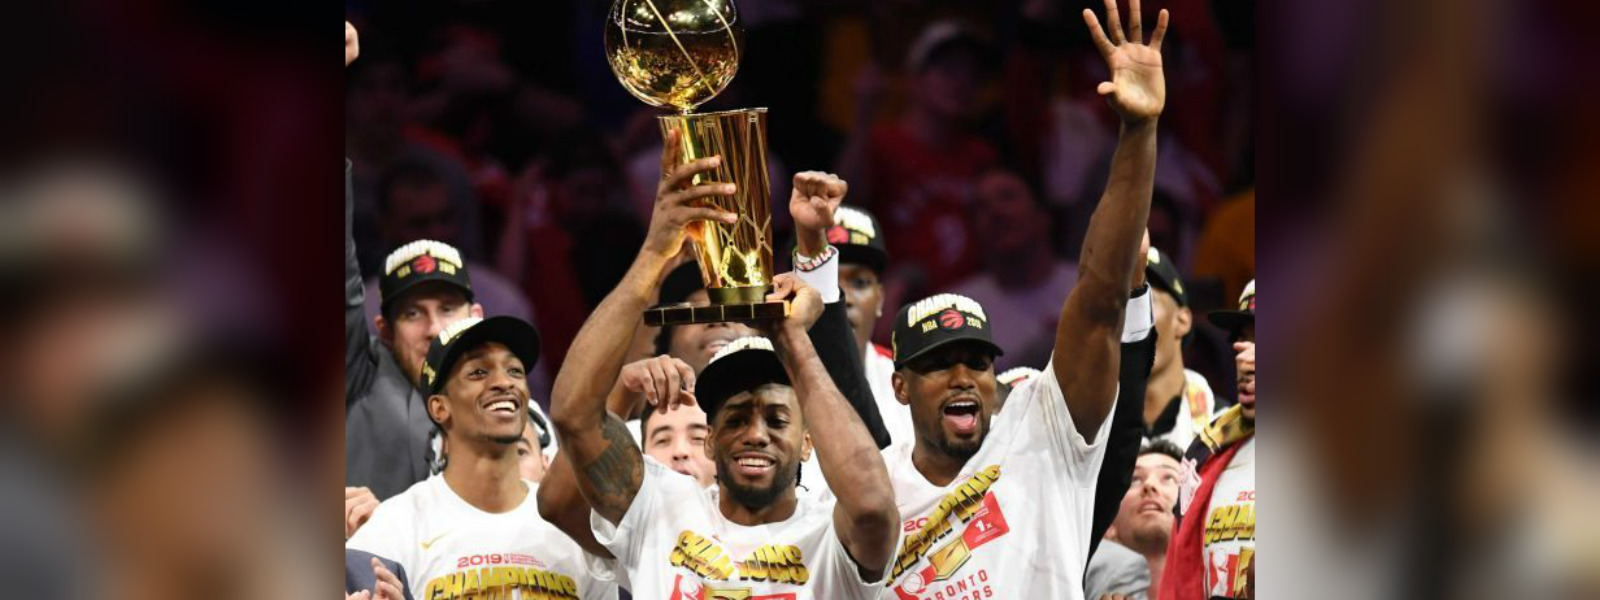 Toronto Raptors defeat Golden State Warriors to become the first Canadian team to win an NBA Championship